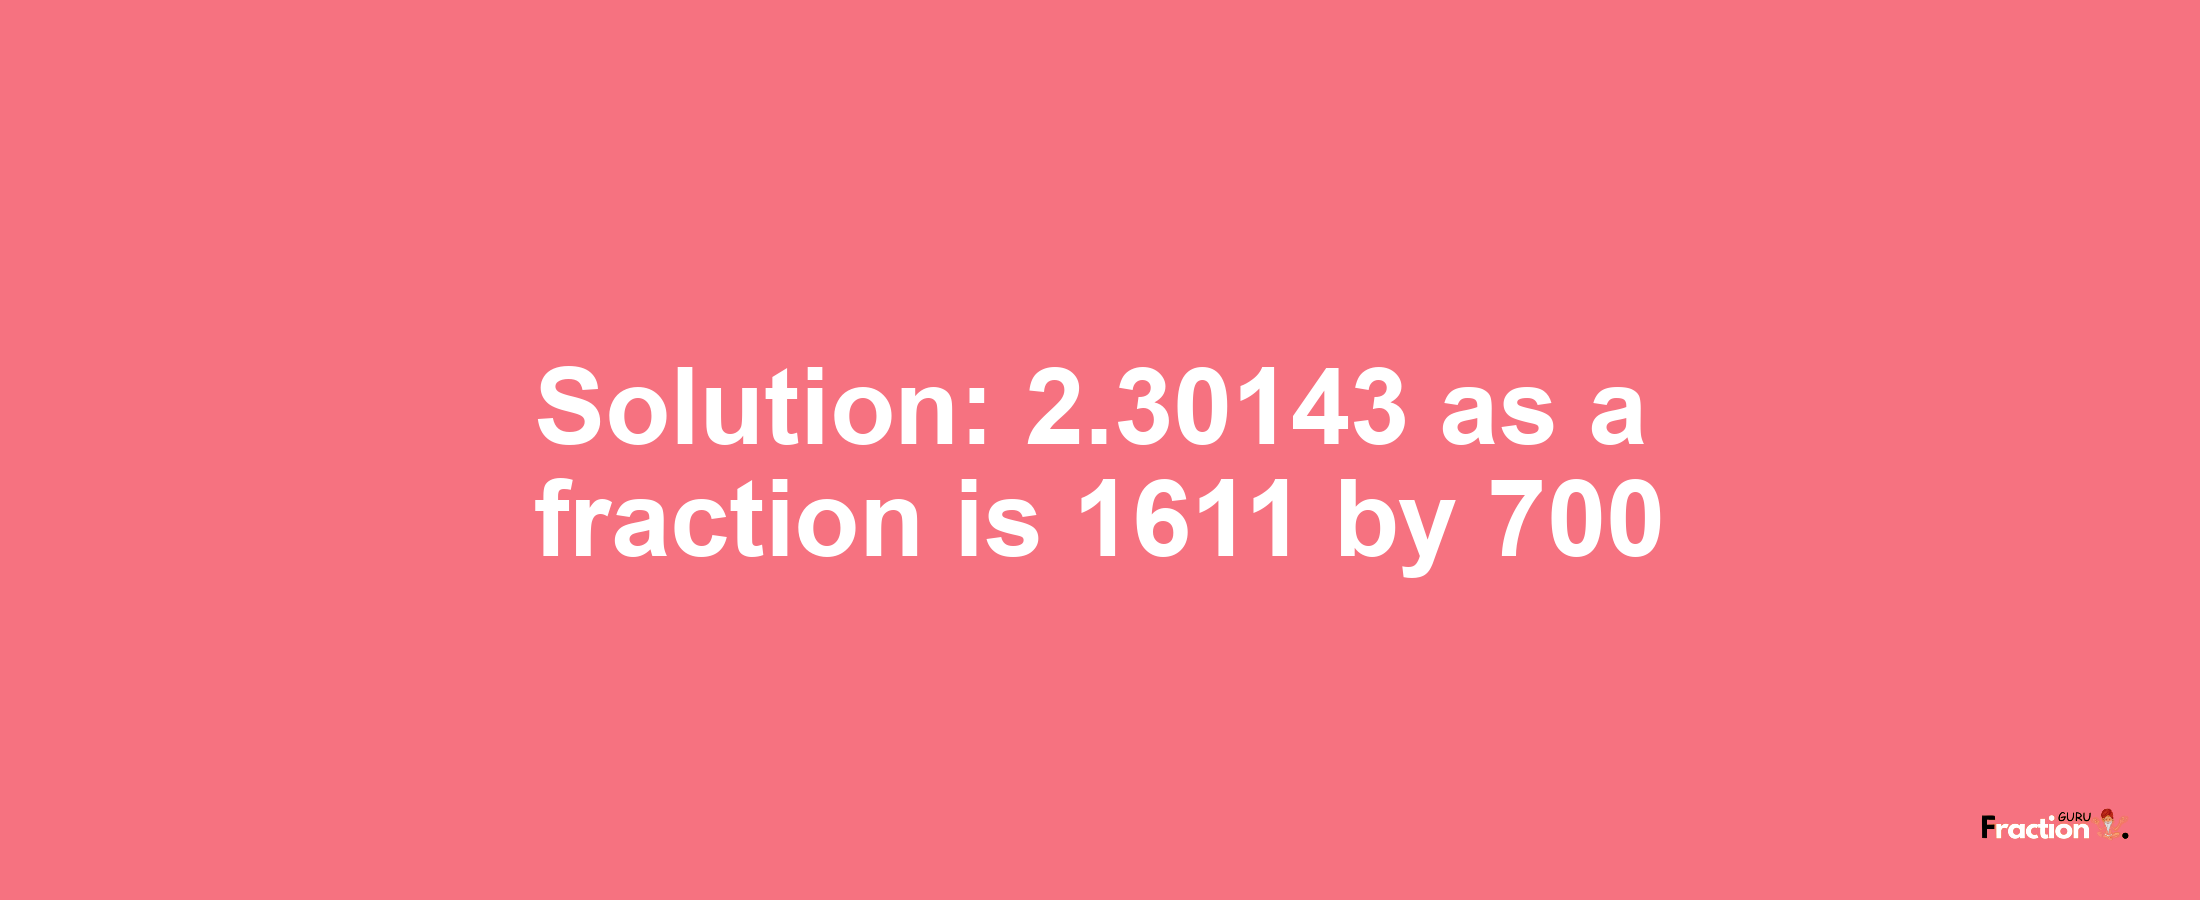 Solution:2.30143 as a fraction is 1611/700